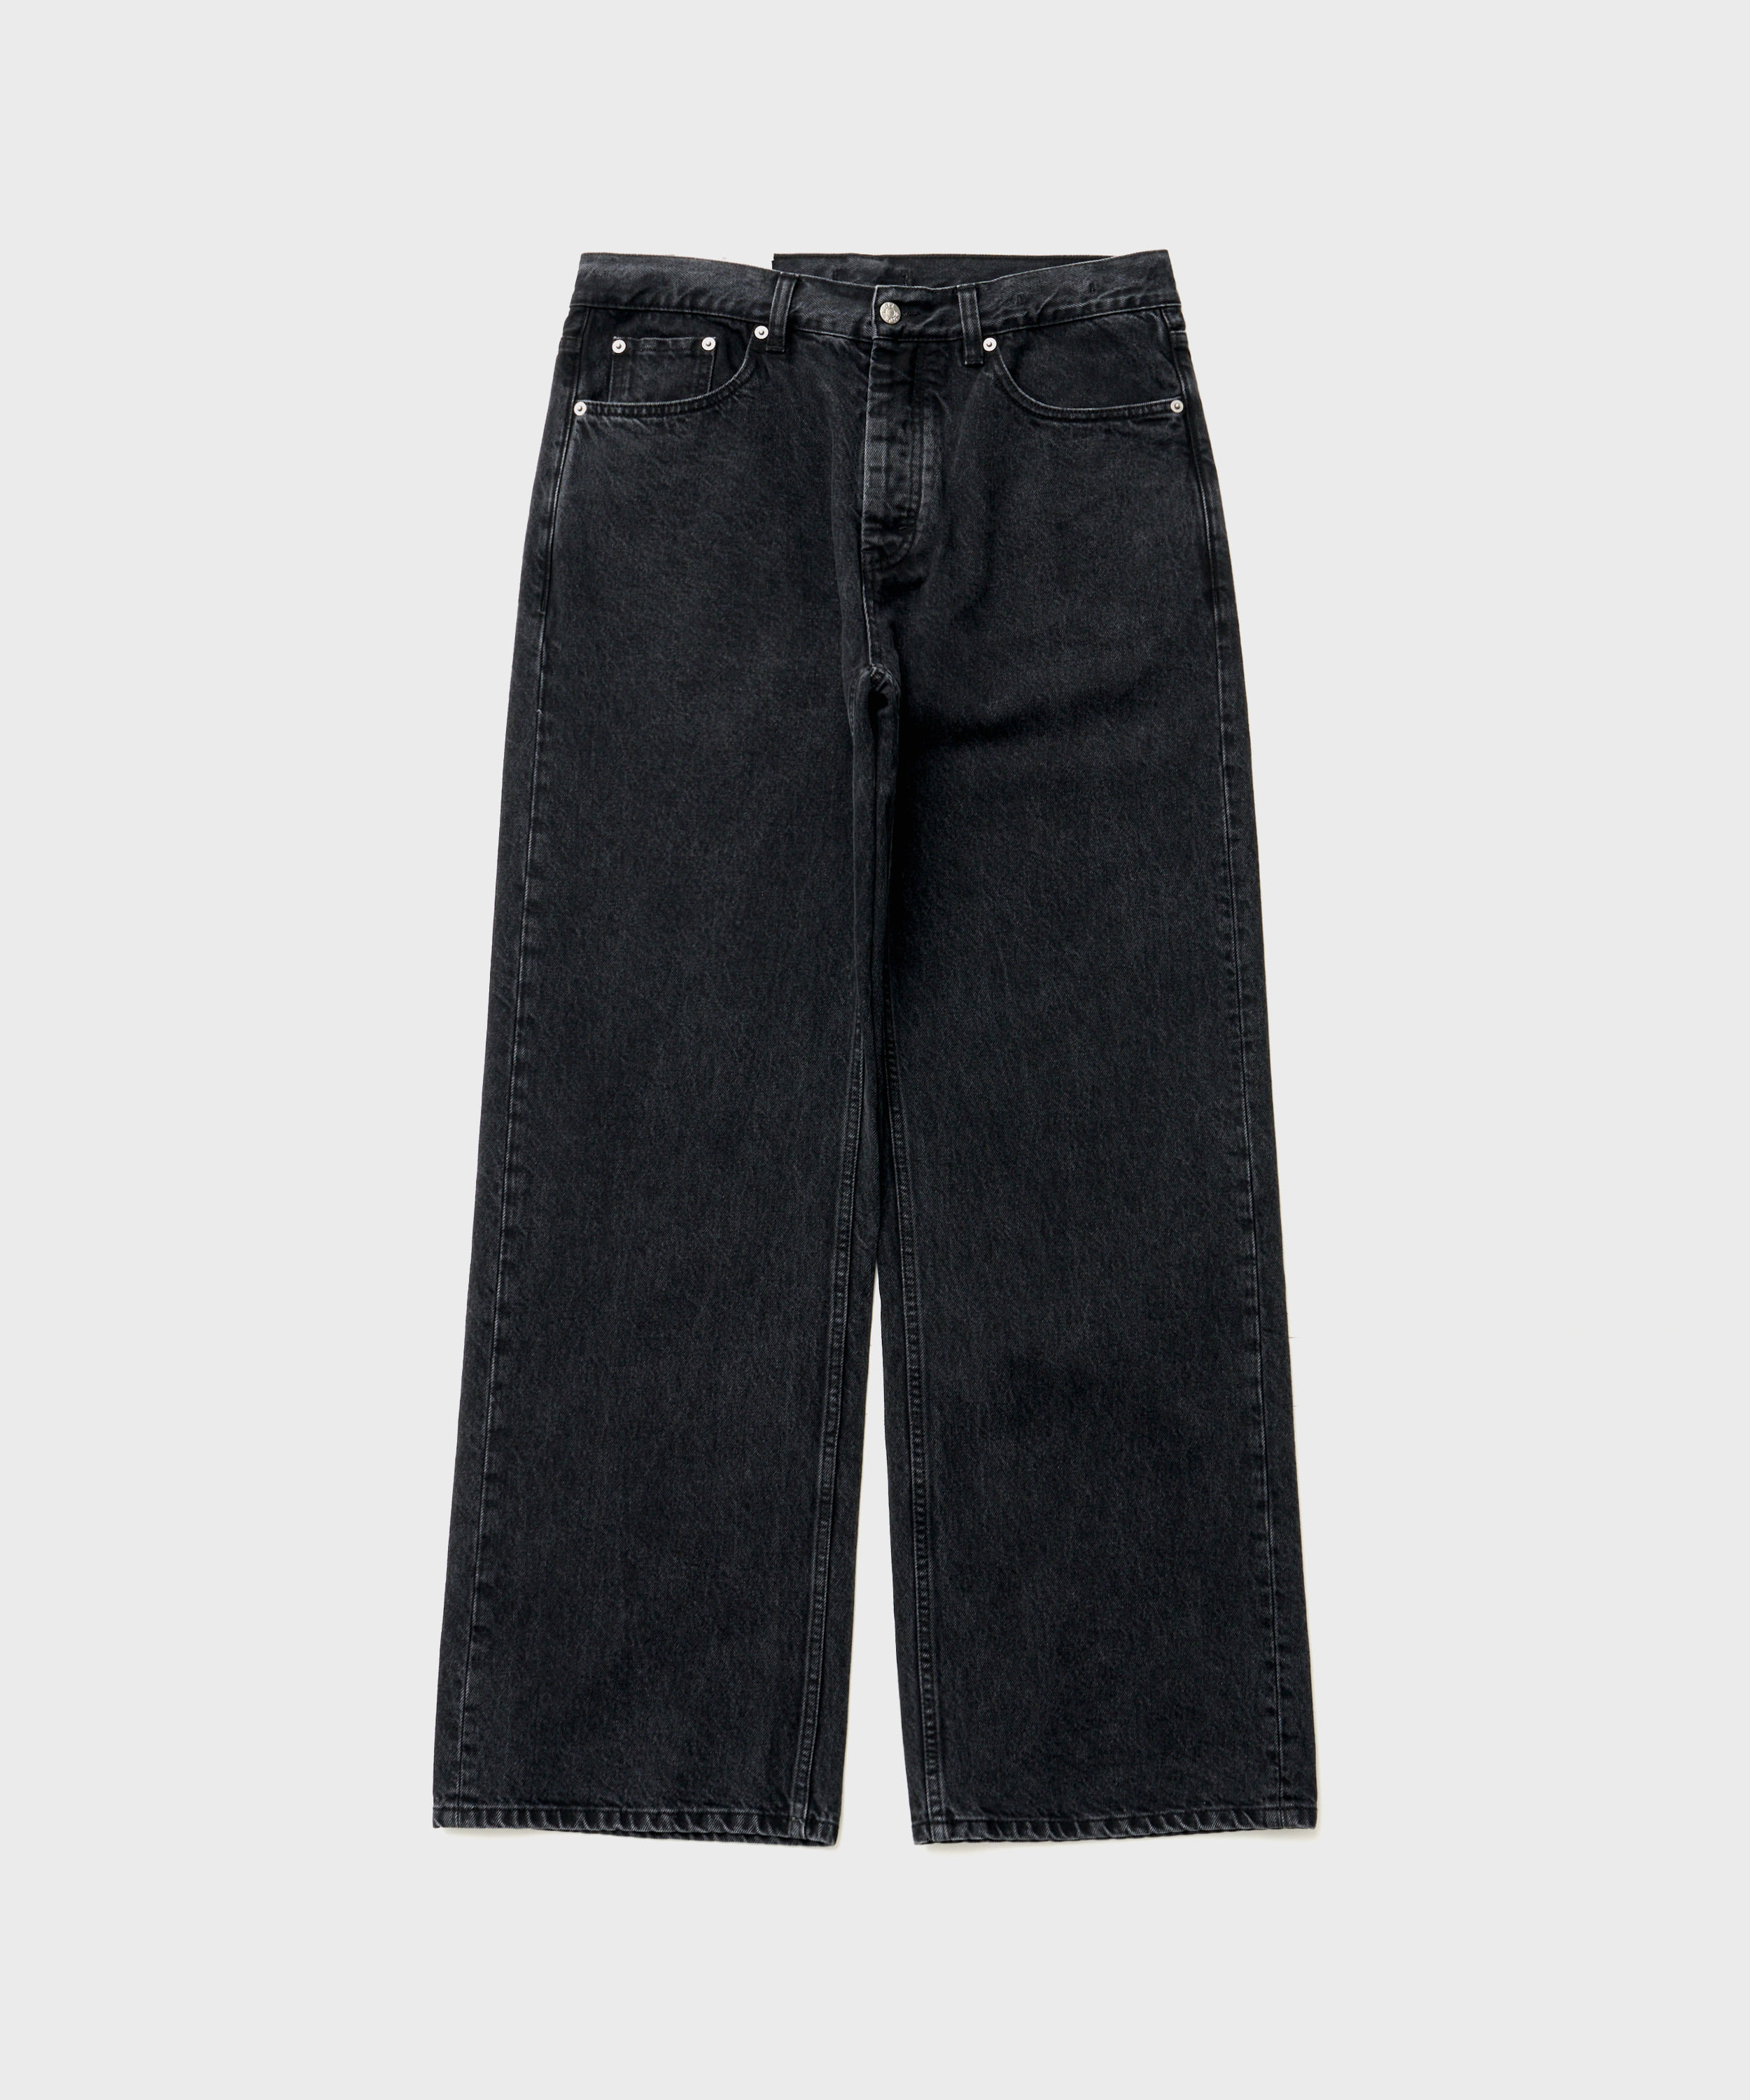 Criss Jeans (Washed Black)